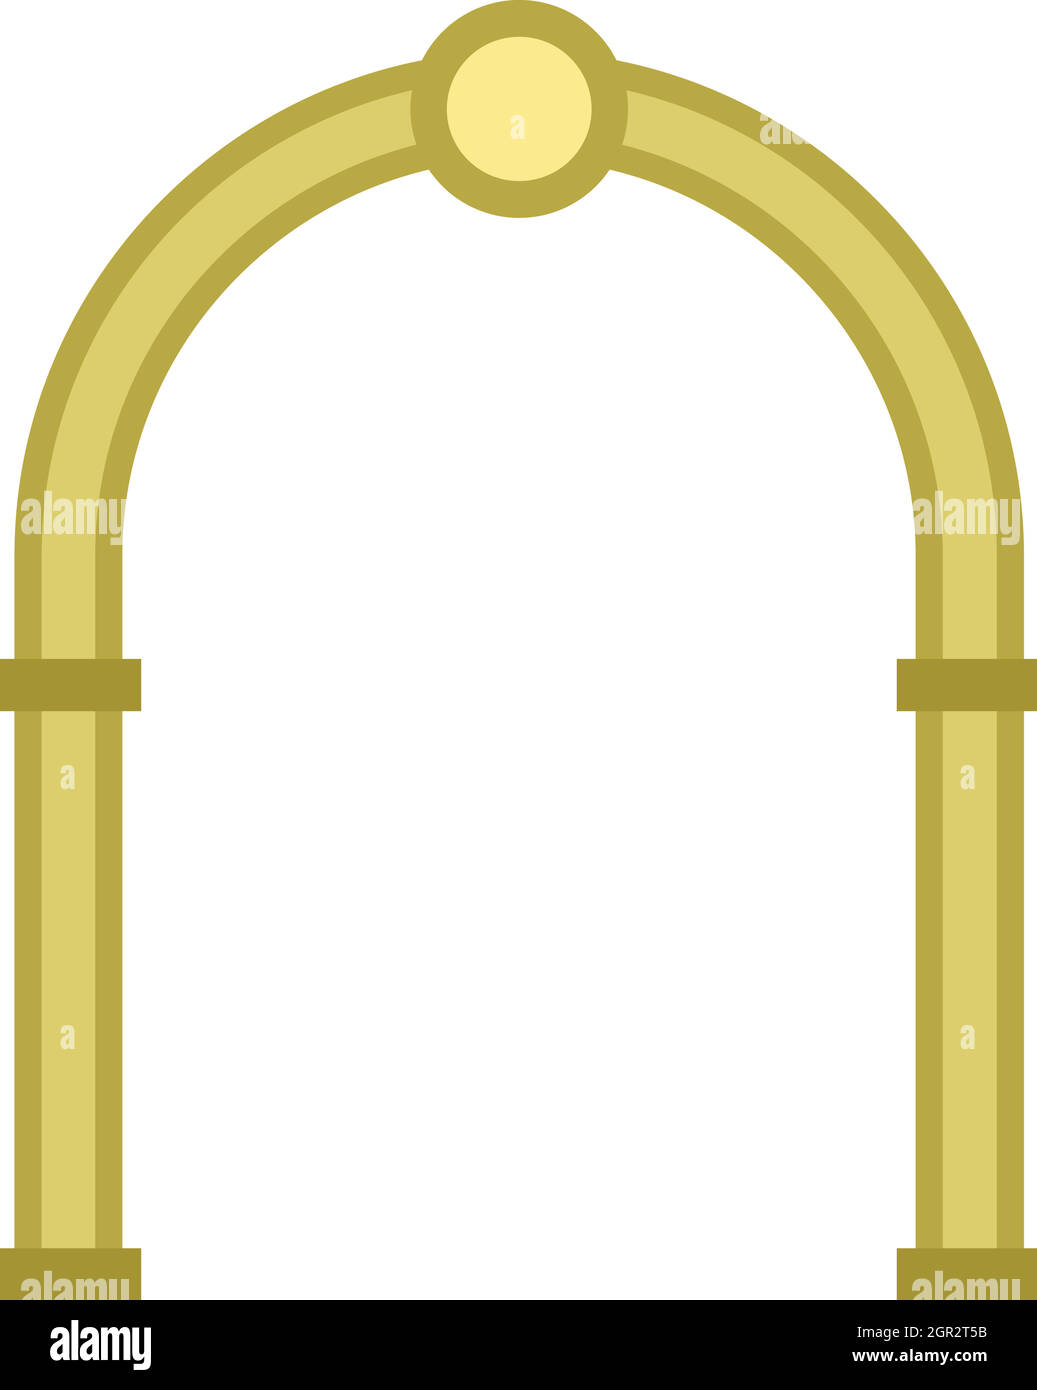 Semicircular arch icon, flat style Stock Vector